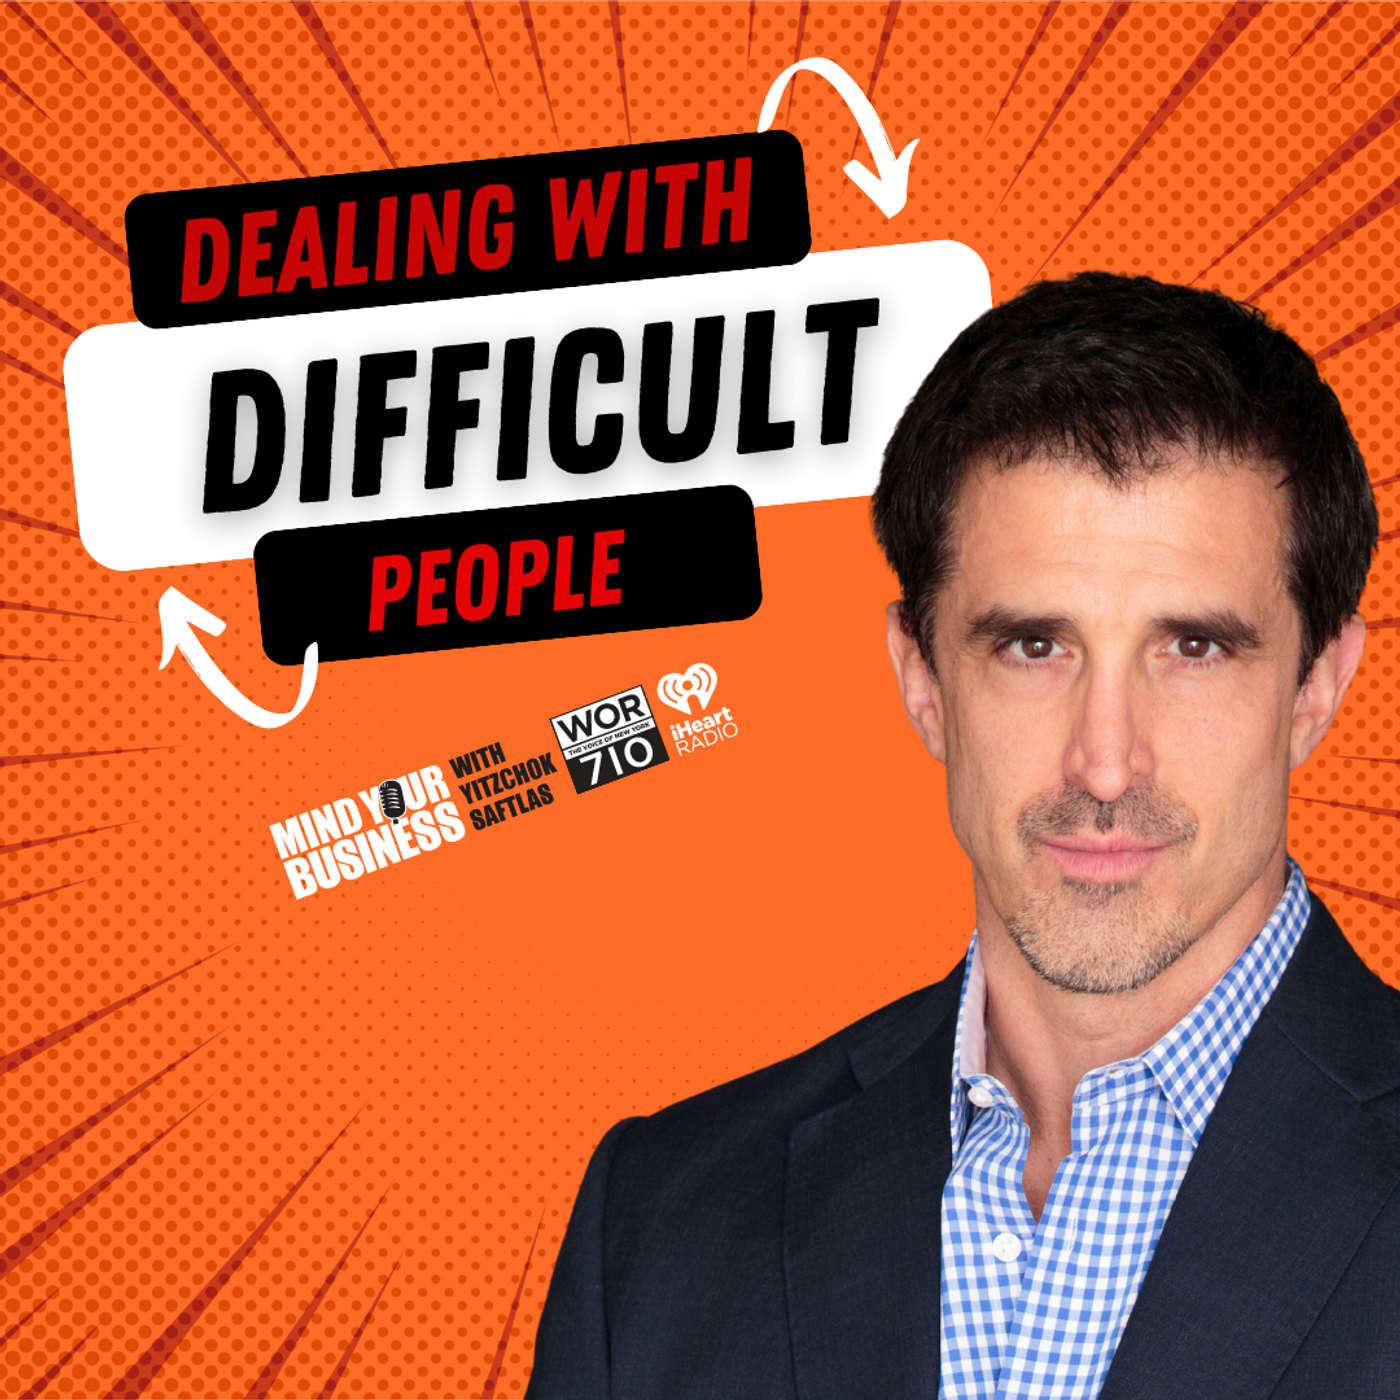 363: Dealing With Difficult People featuring Steven Gaffney, Communications Consultant for Fortune 500 Companies